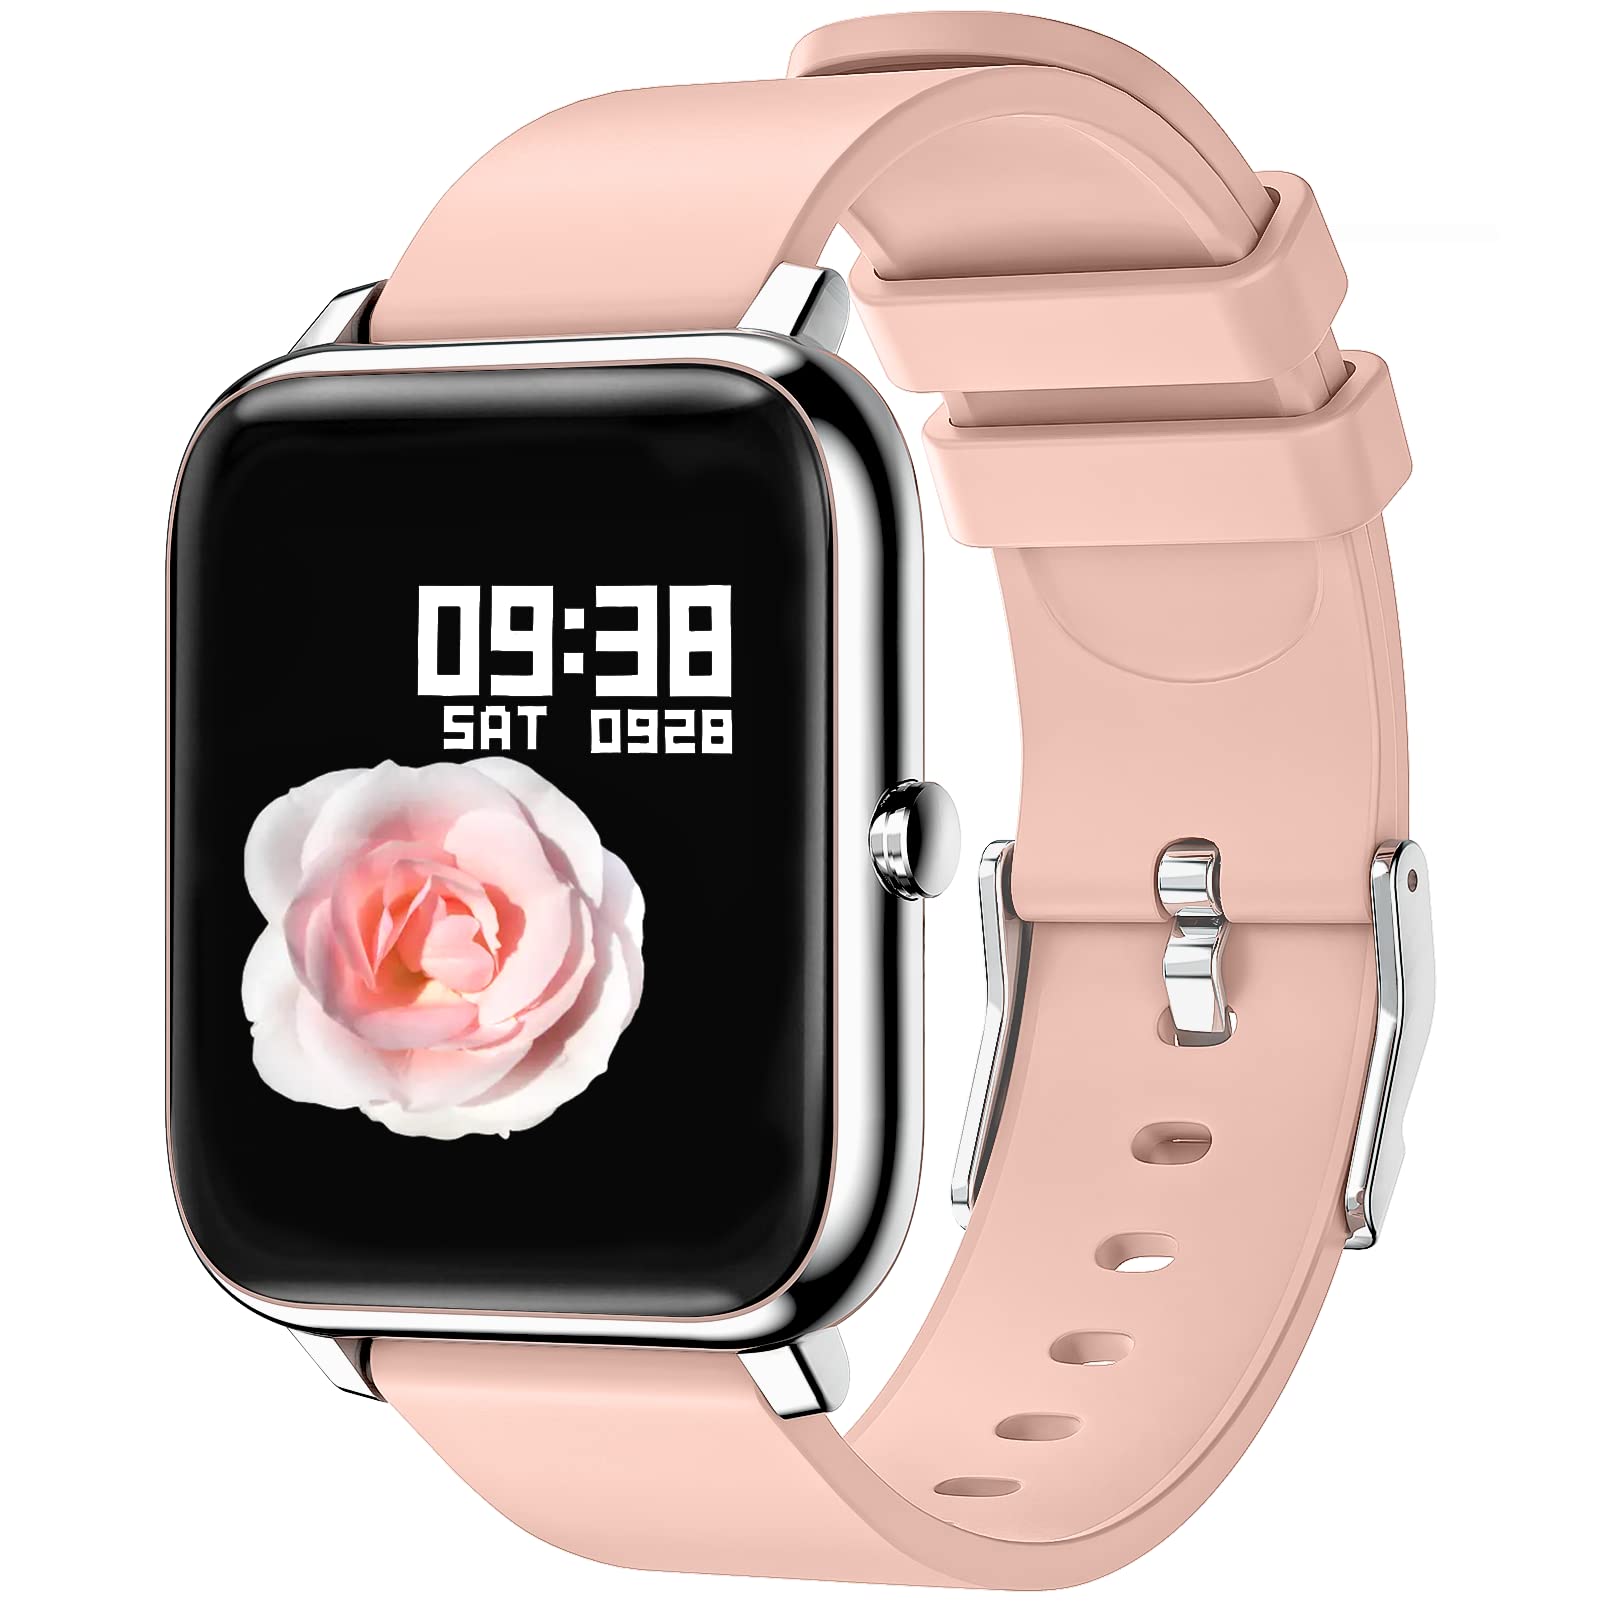 IDEALROYAL Smart Watch for Women, Fitness Tracker with Blood Oxygen, Heart Rate Monitor, Sleep Monitor, Calorie Counter, Fitness Watch Smart Watch IP67 Waterproof Smartwatch for iPhone Android IOS